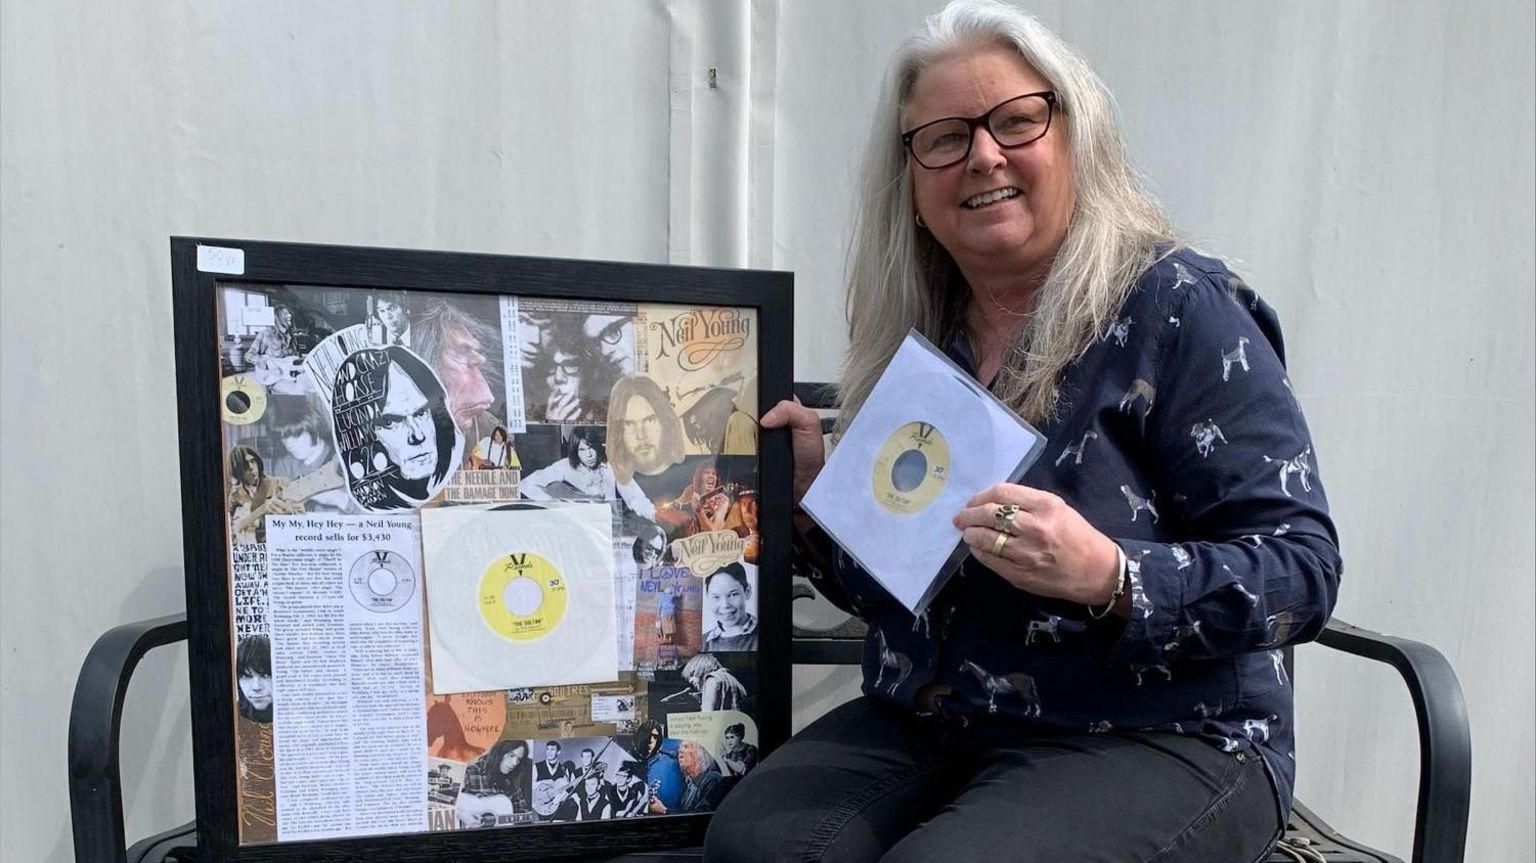 Claire Howell posing with collage and vinyl